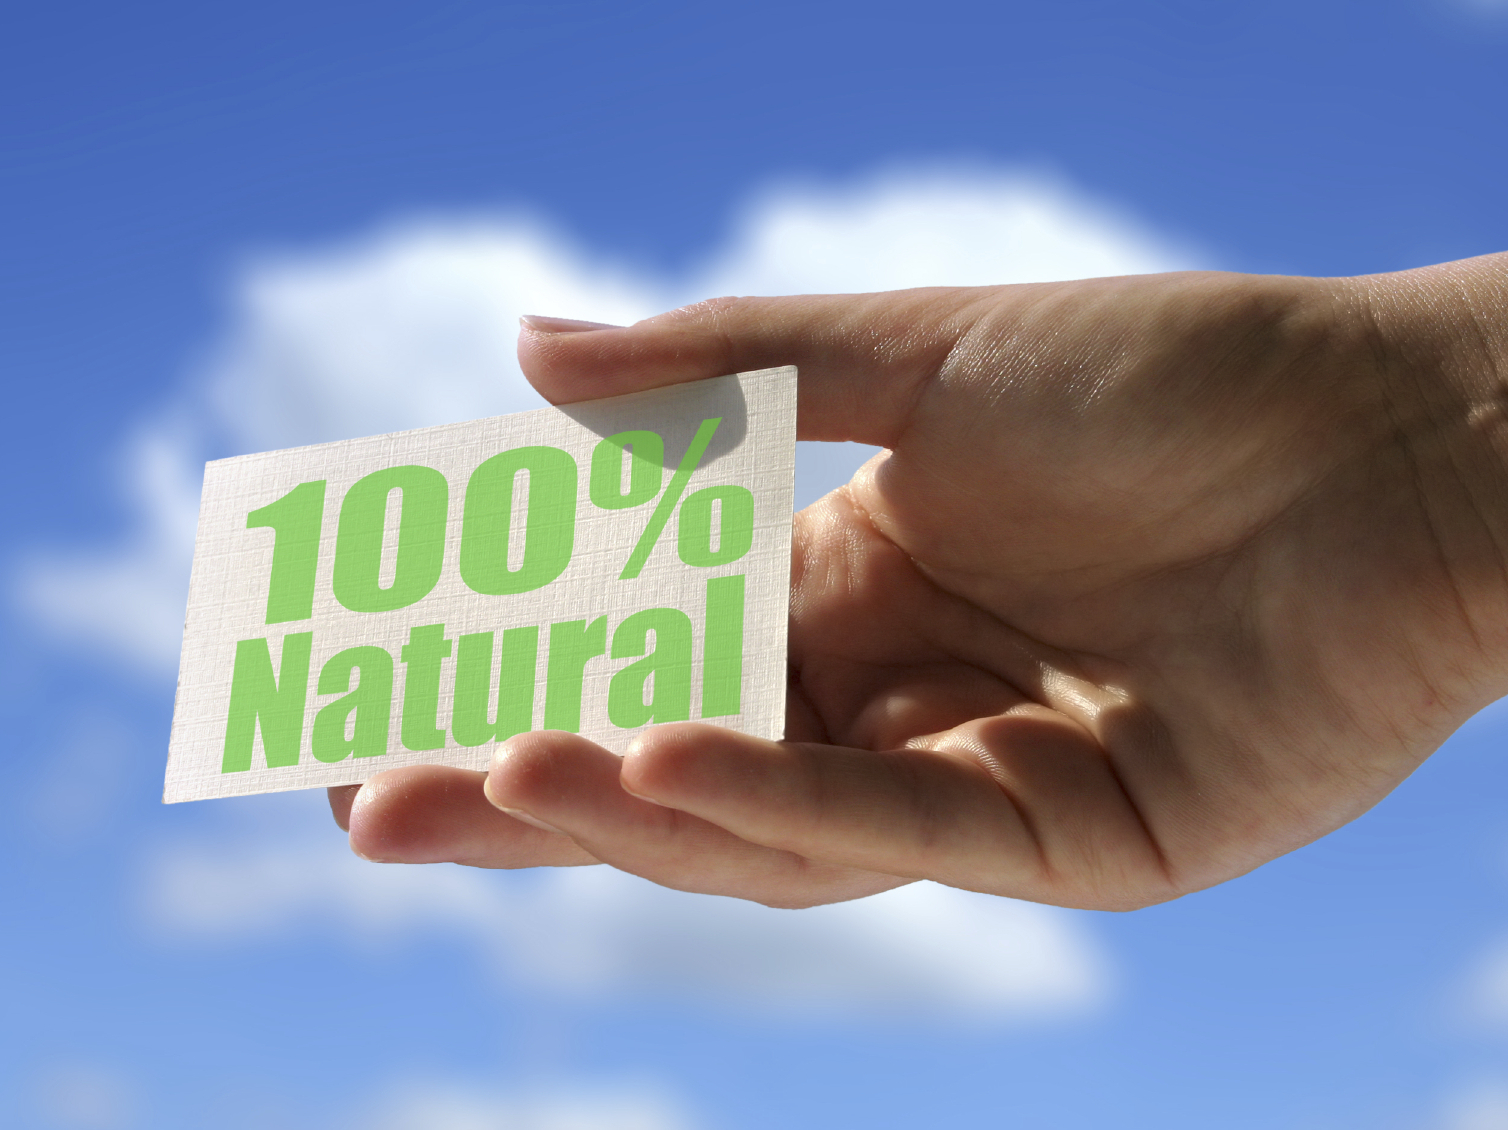 Advocates say consumers may assume that the "natural" label is the same as "organic." Photo: iStockphoto